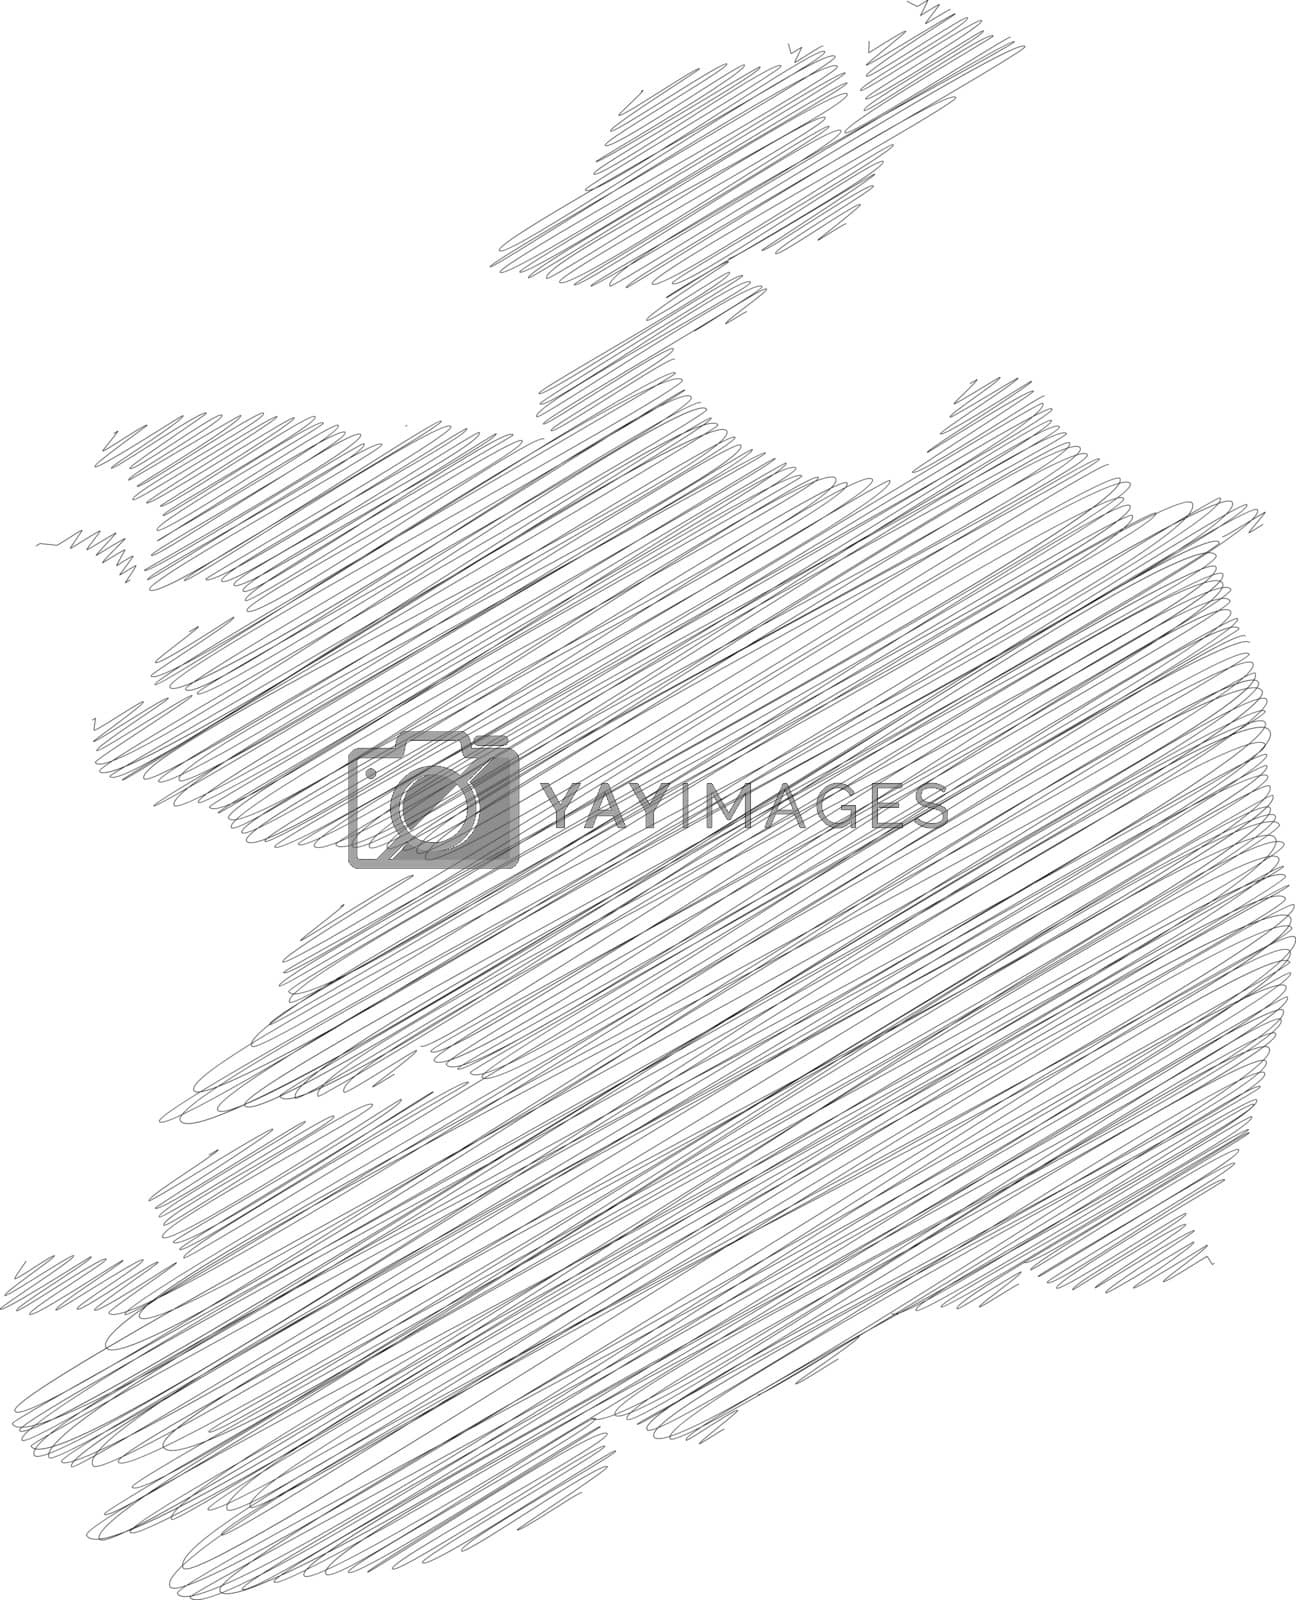 Royalty free image of Ireland - pencil scribble sketch silhouette map of country area with dropped shadow. Simple flat vector illustration by pyty